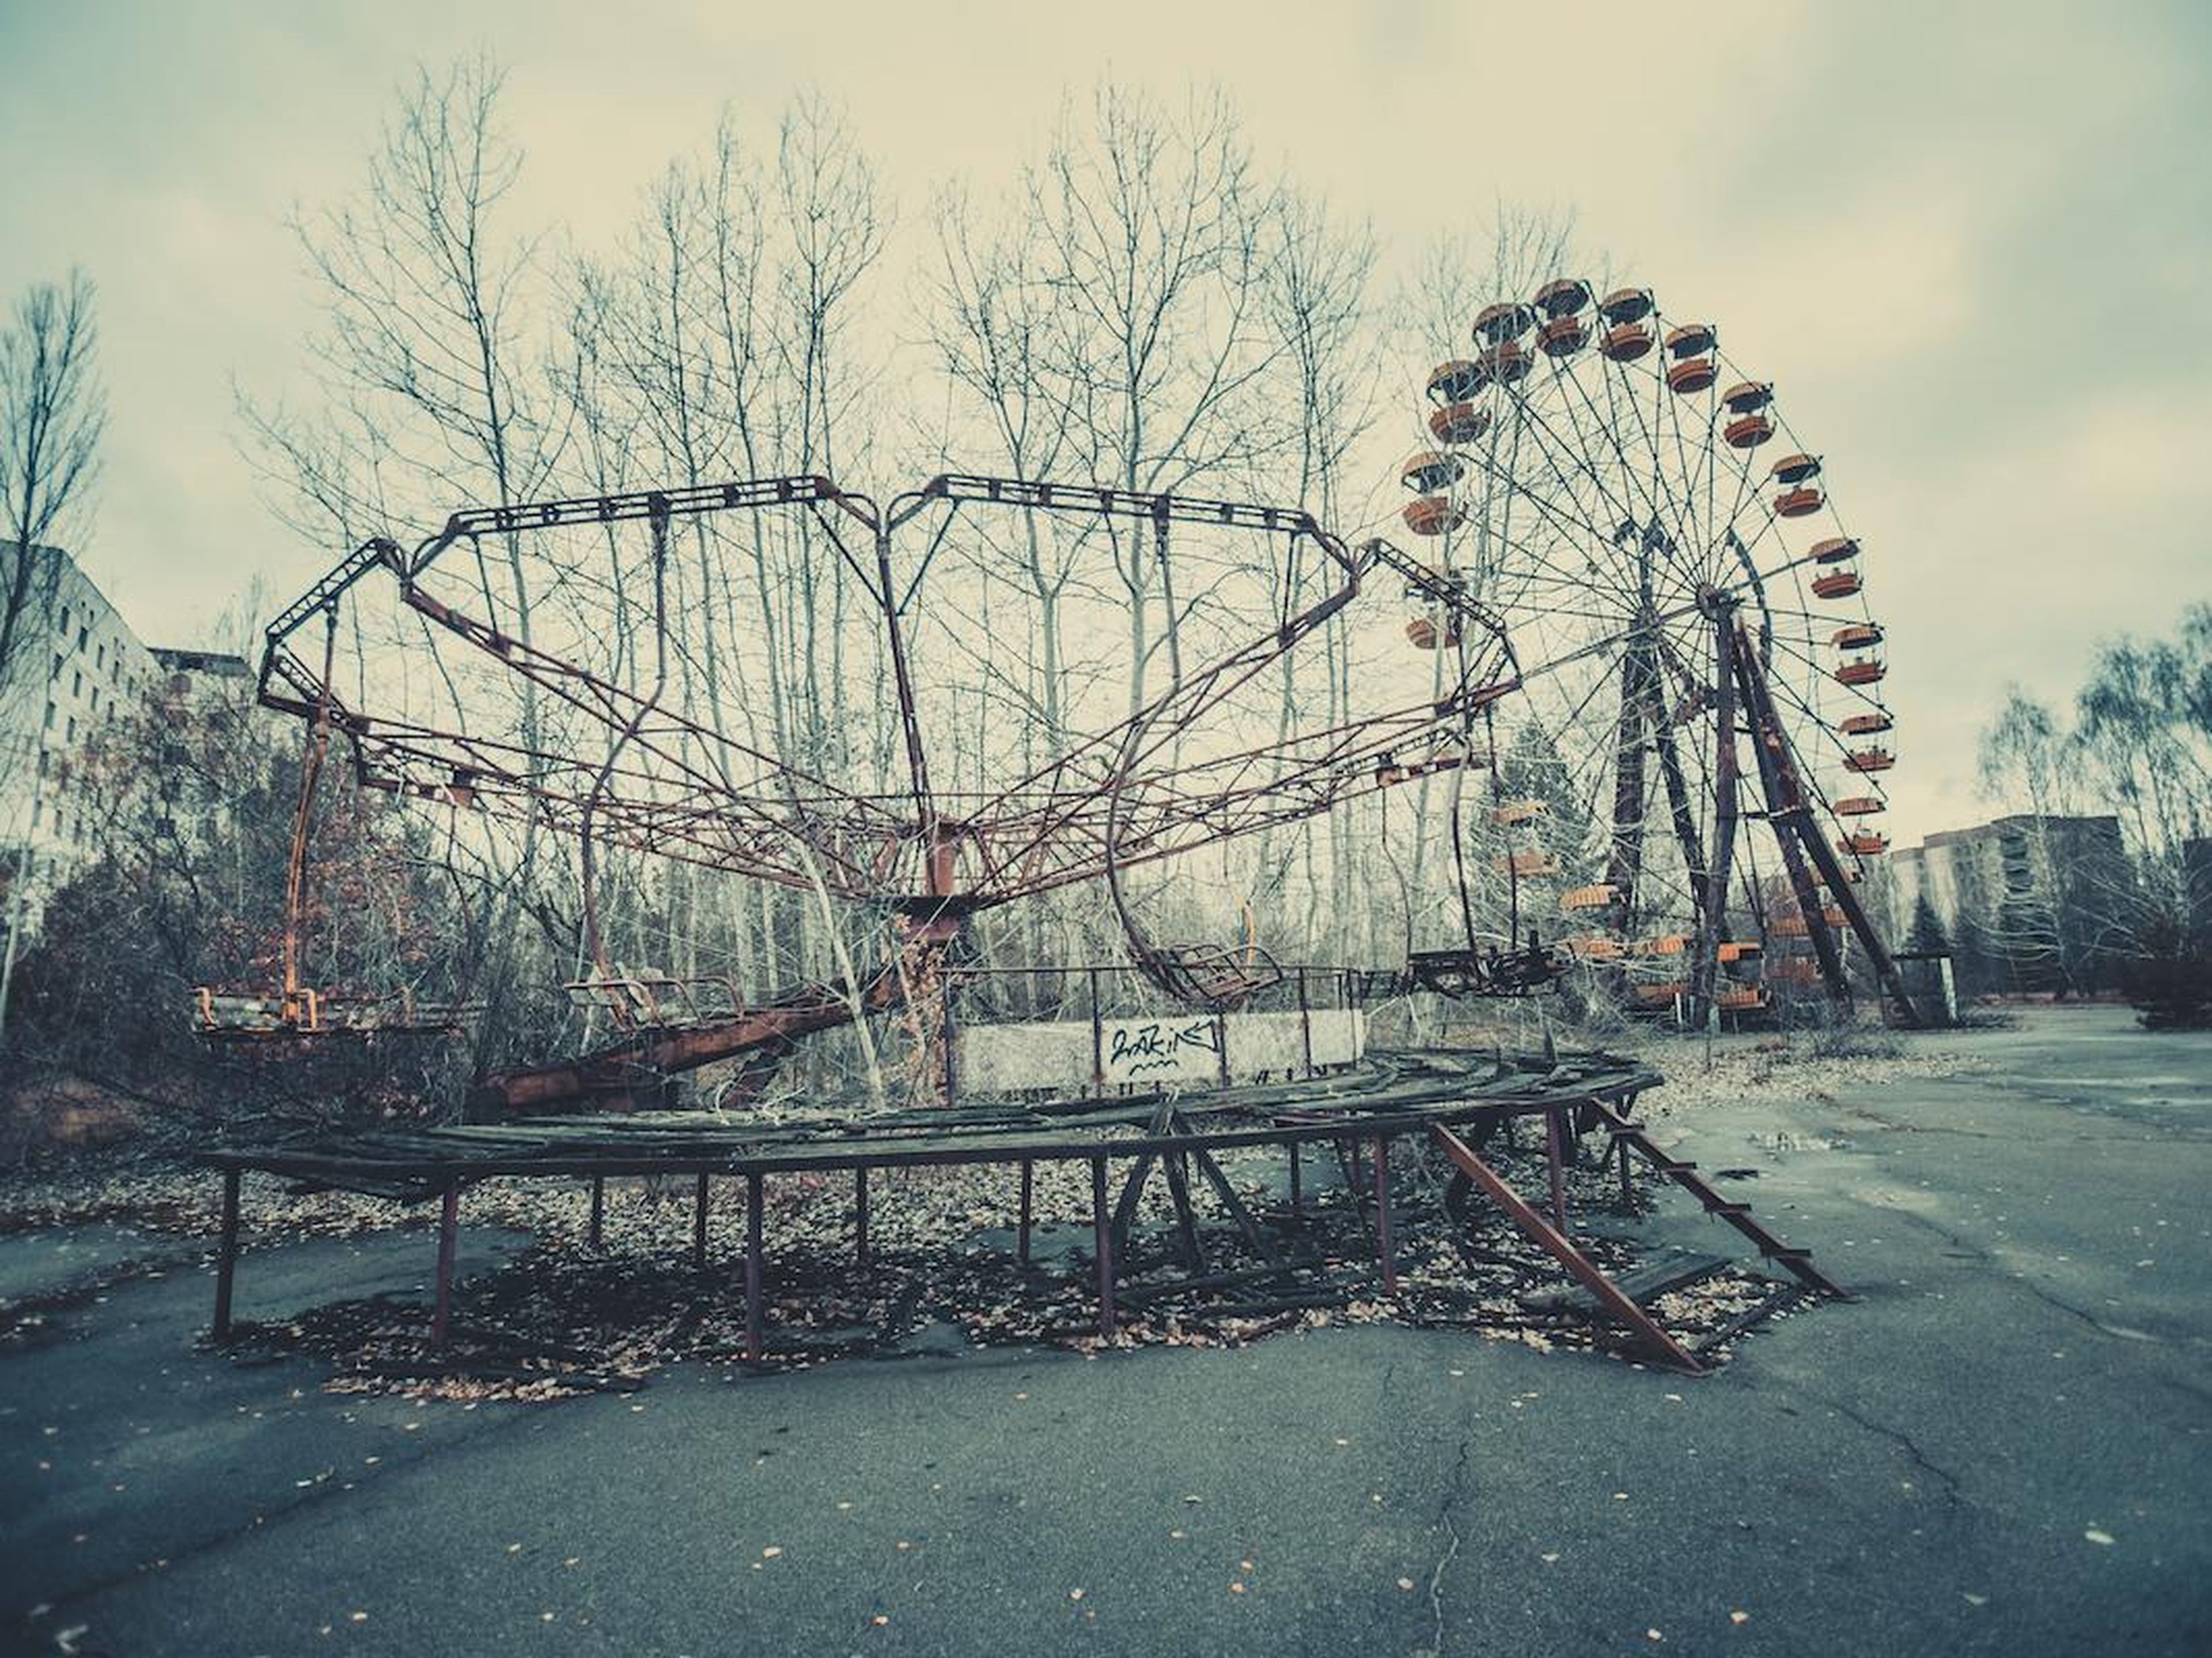 Pripyat was evacuated during the Chernobyl nuclear disaster in 1986.